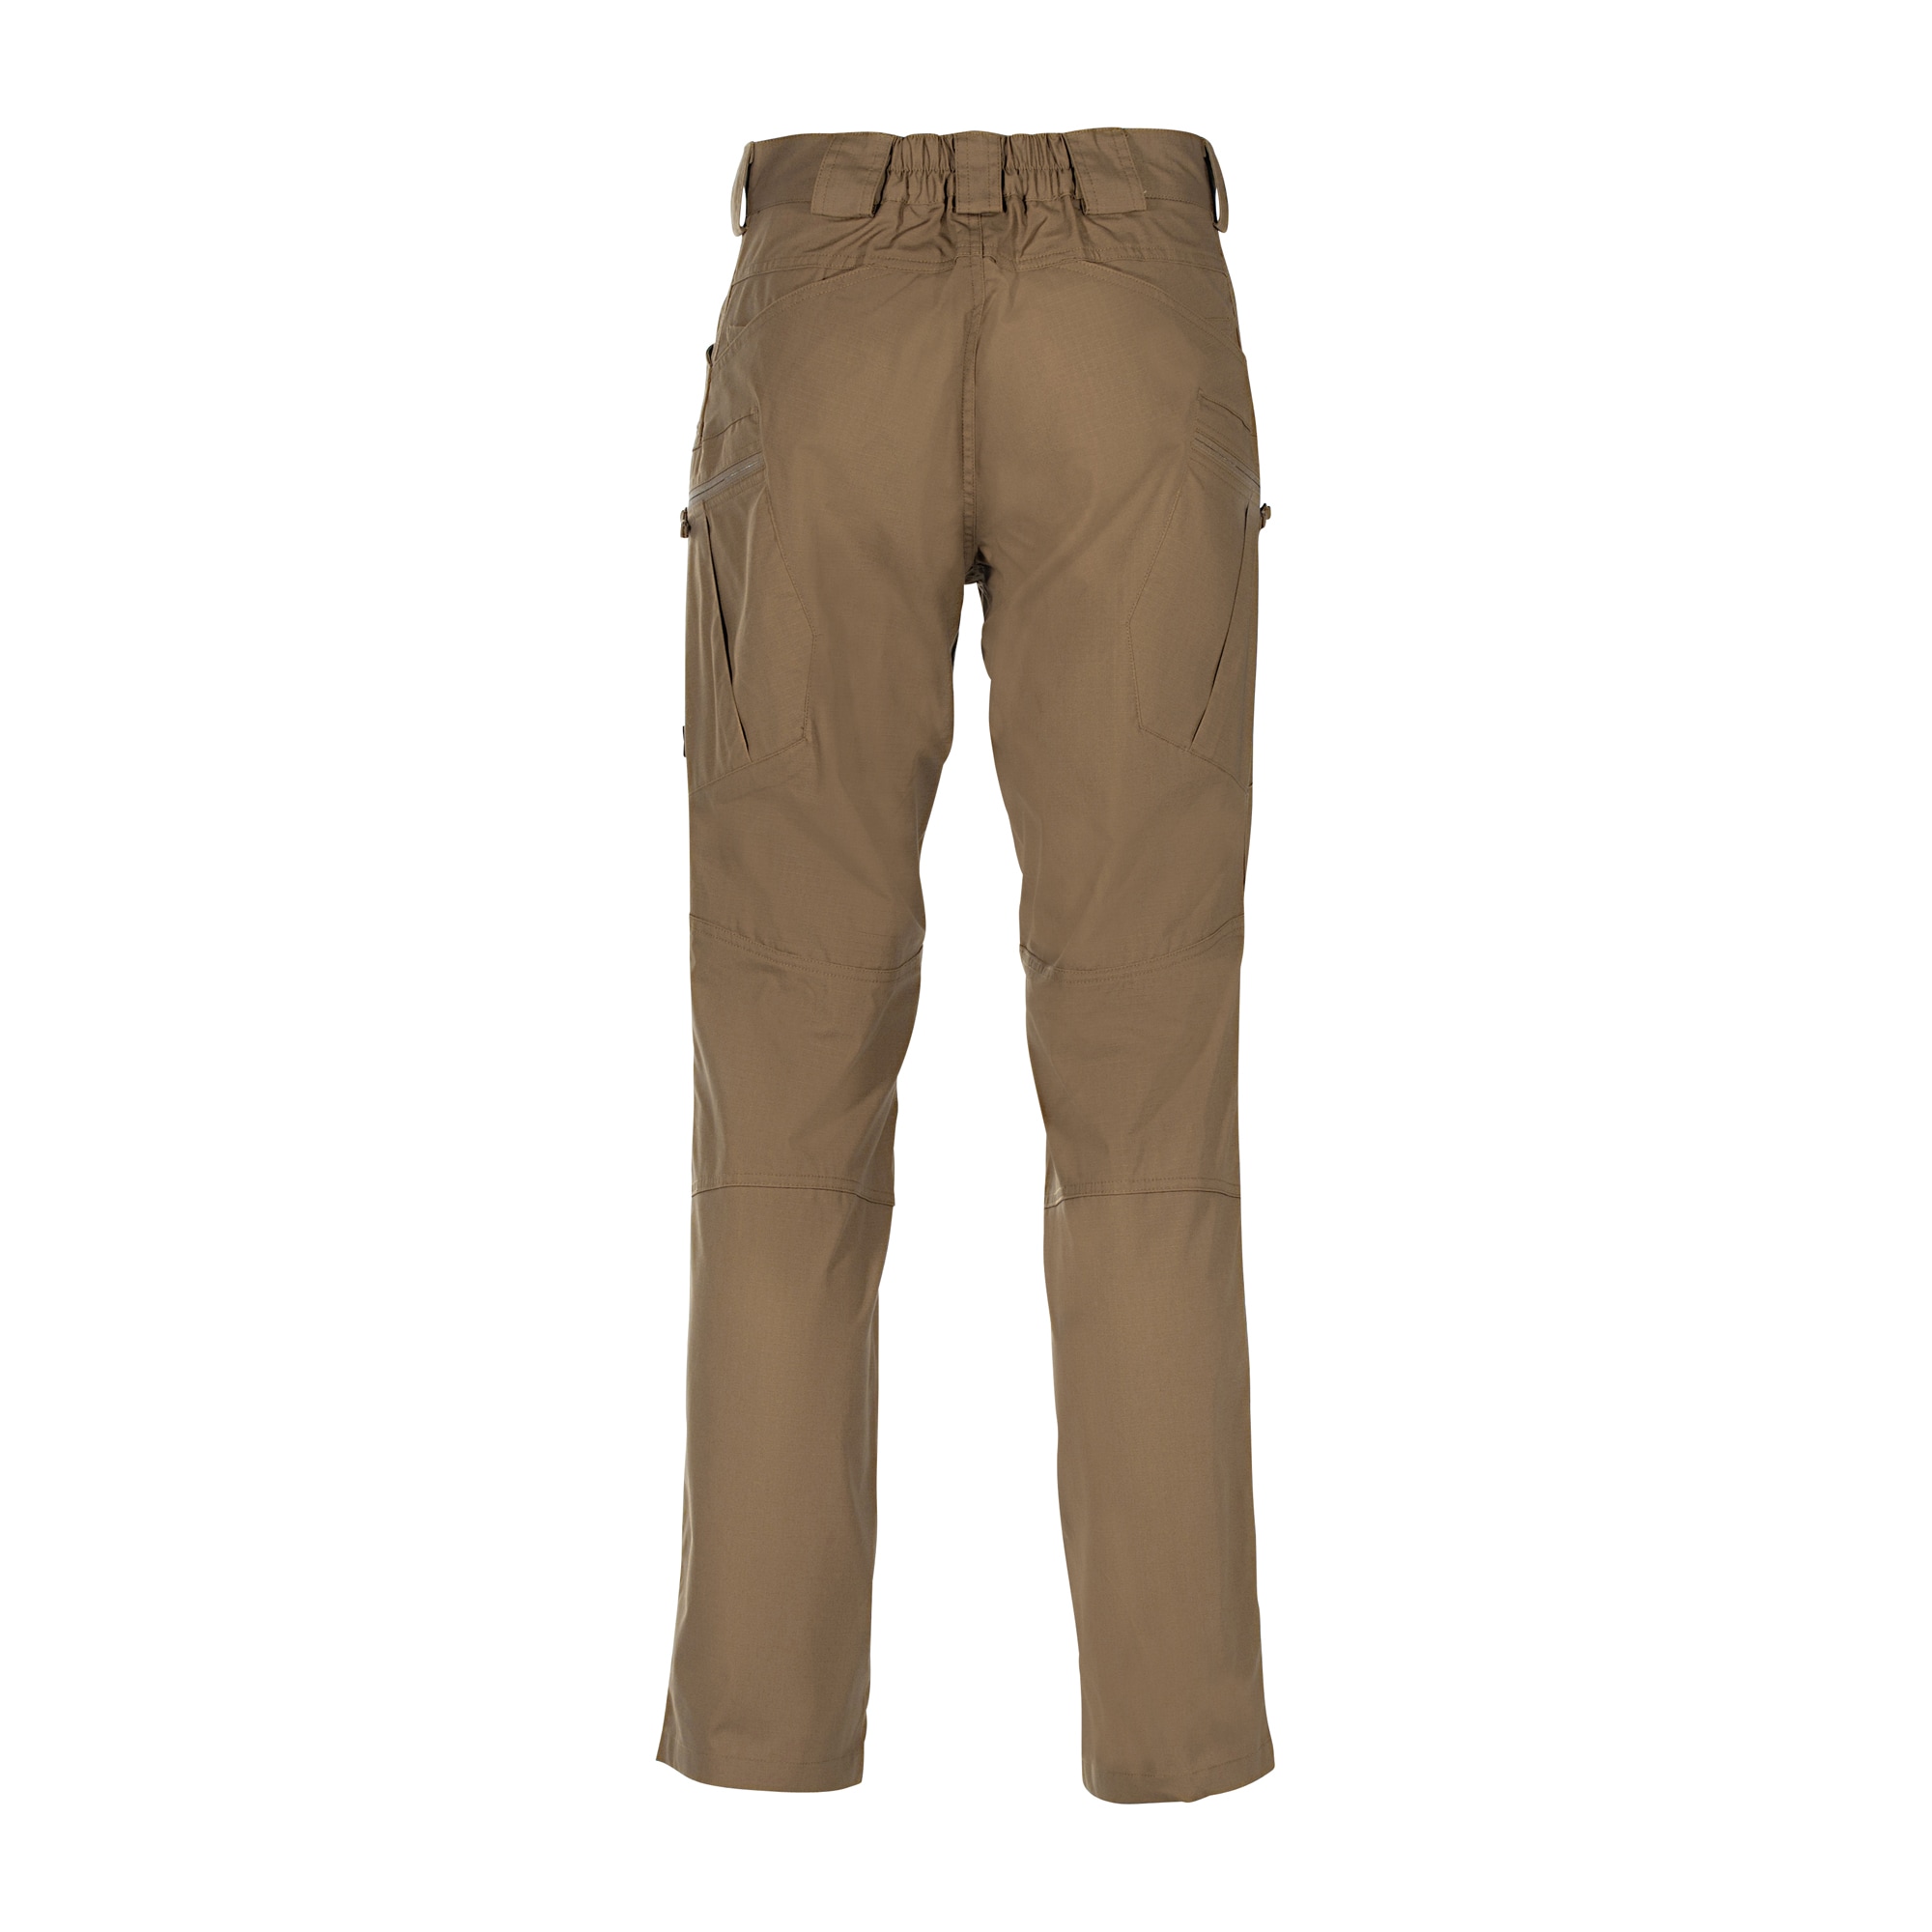 Purchase the Helikon-Tex Pants UTP Polycotton Ripstop mud brown